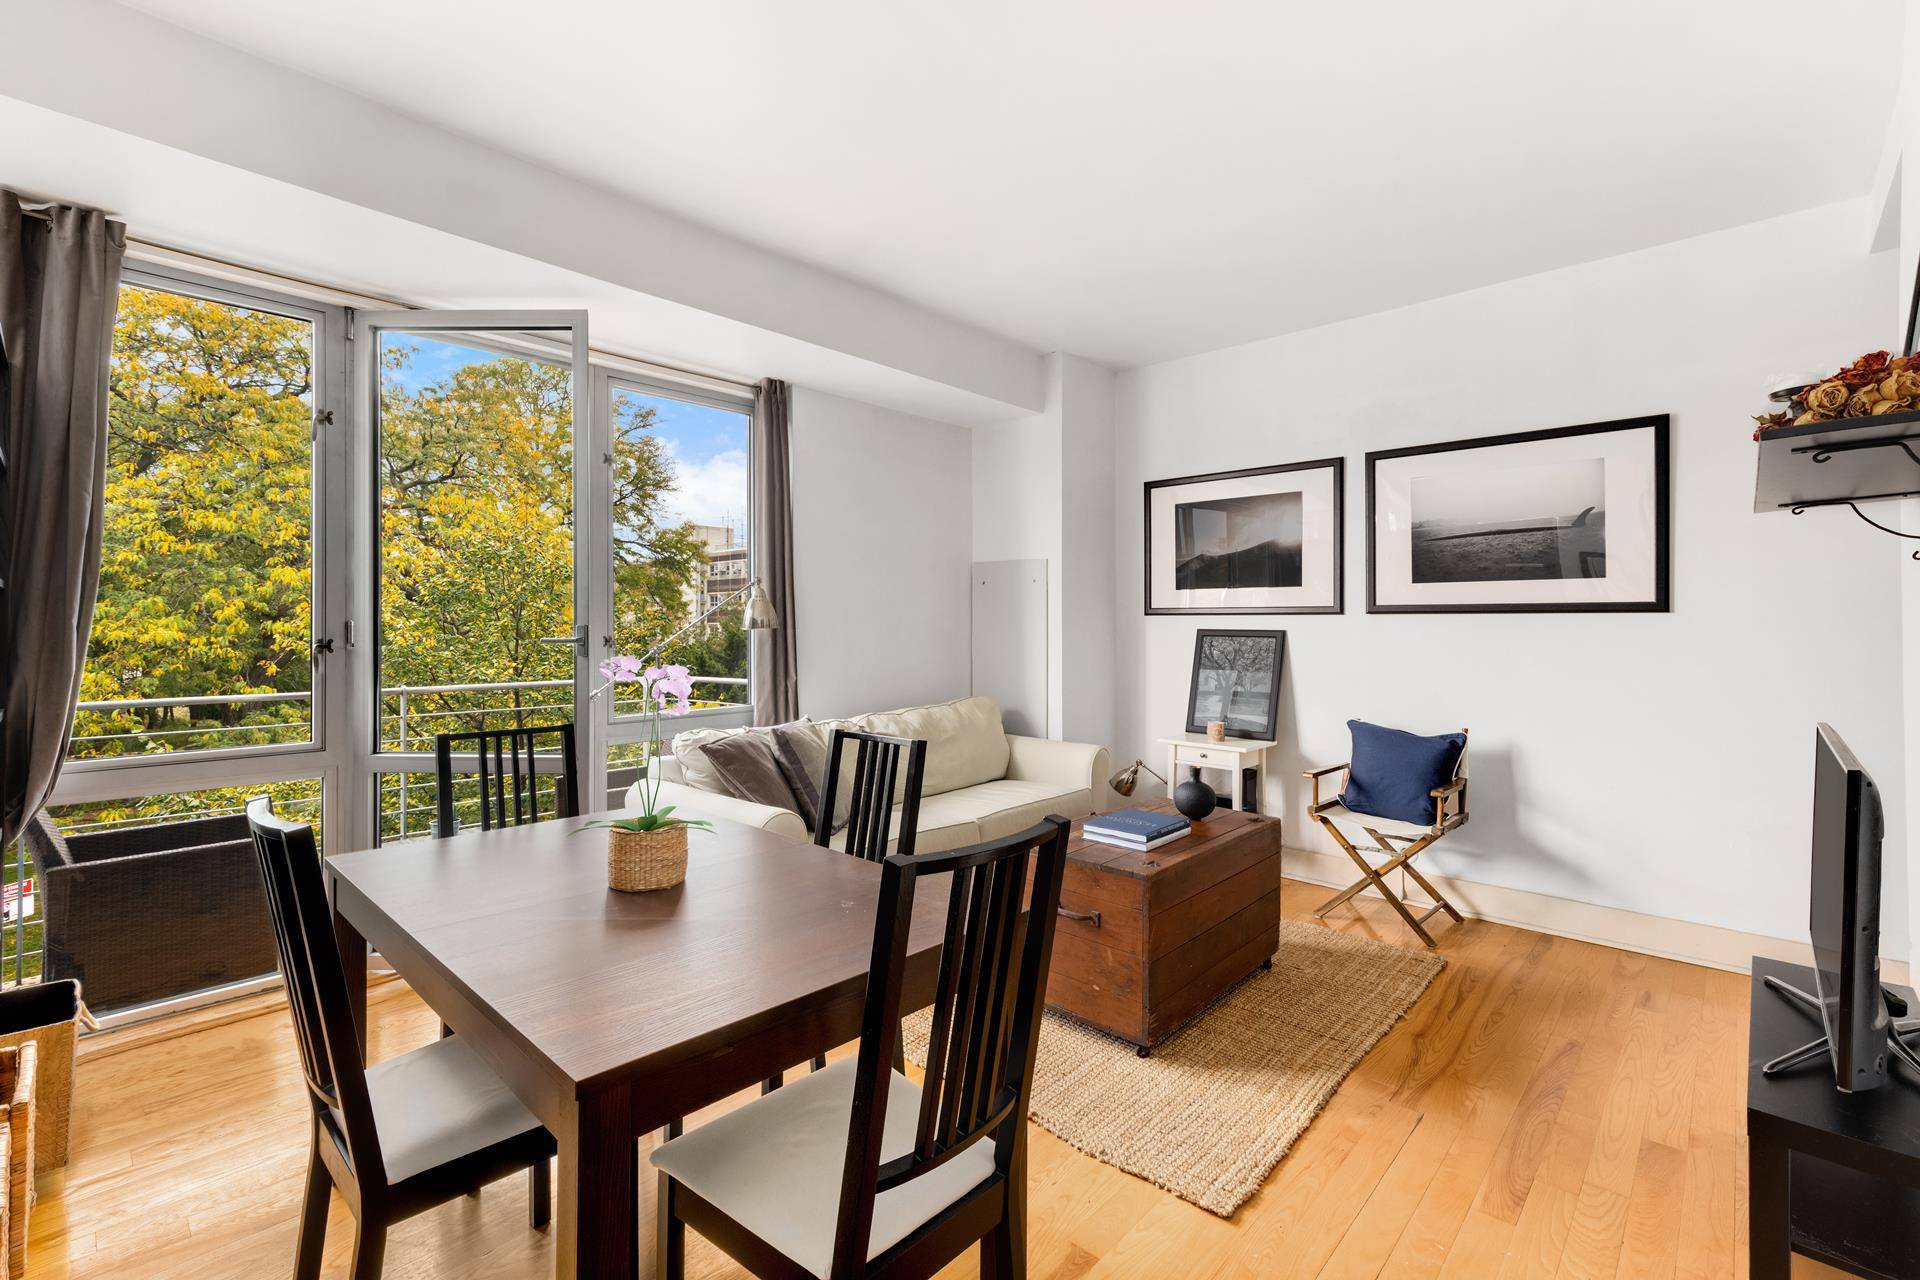 Located directly across the famous McCarren Park in an exclusive boutique condominium.